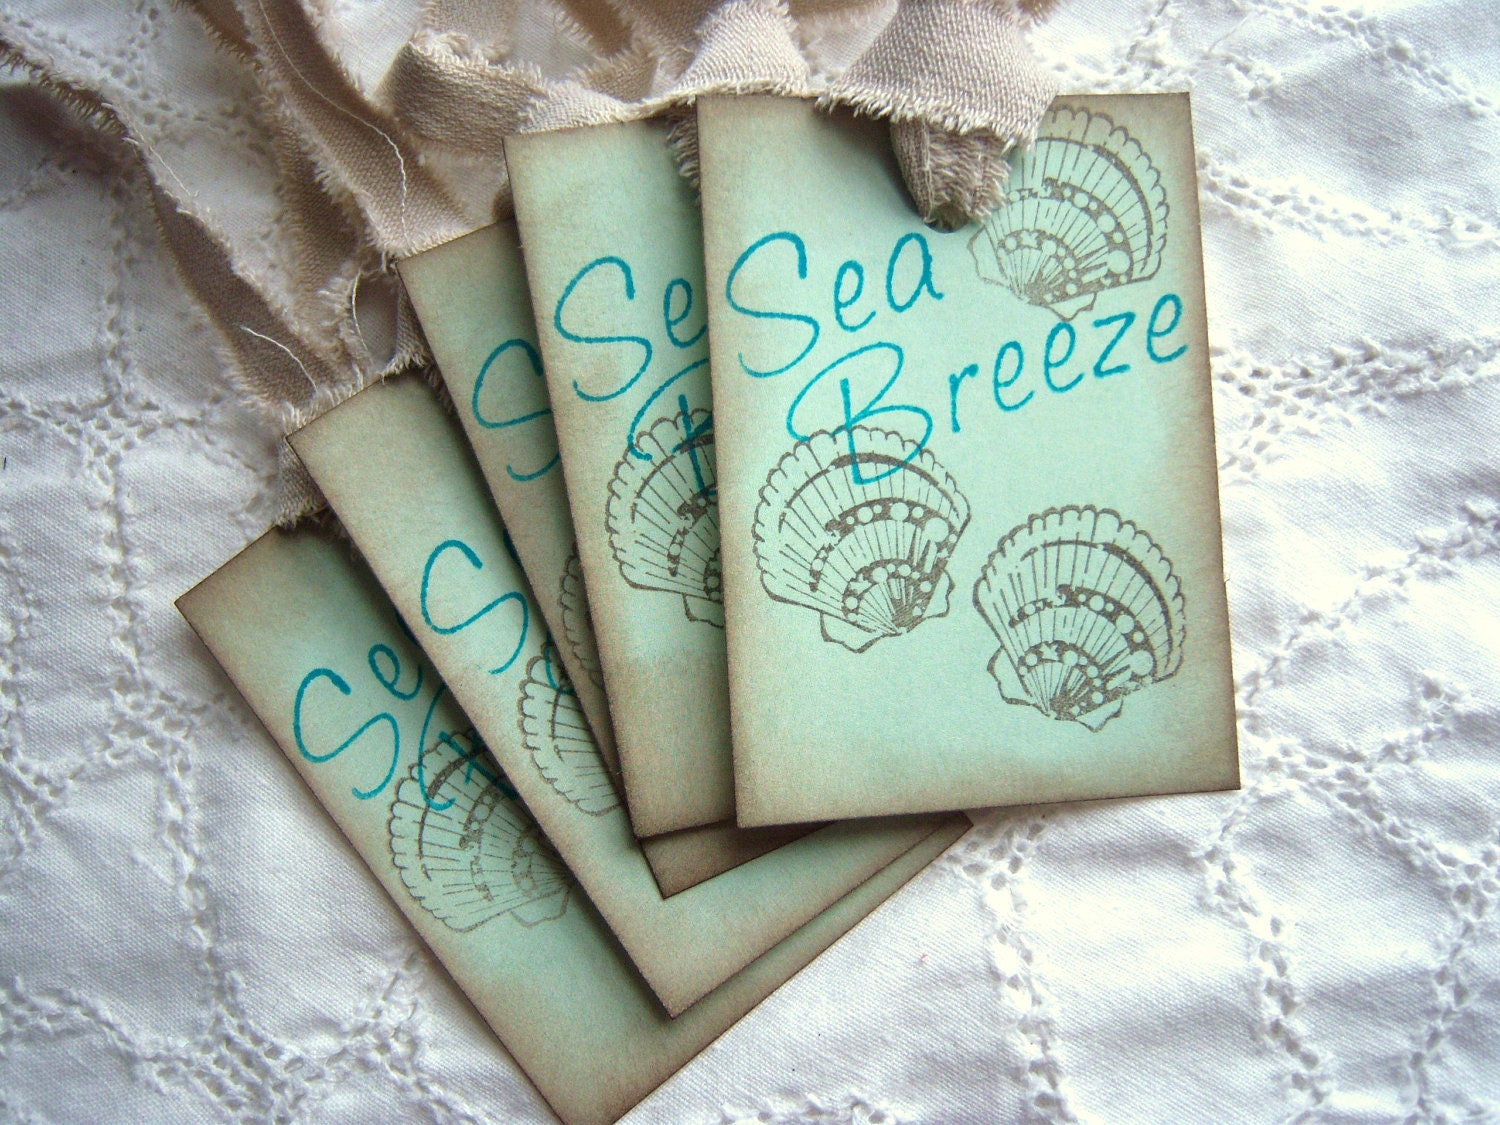 Sea Breeze and Sea Shells - Vintage Inspired Shabby Chic Hang Tags